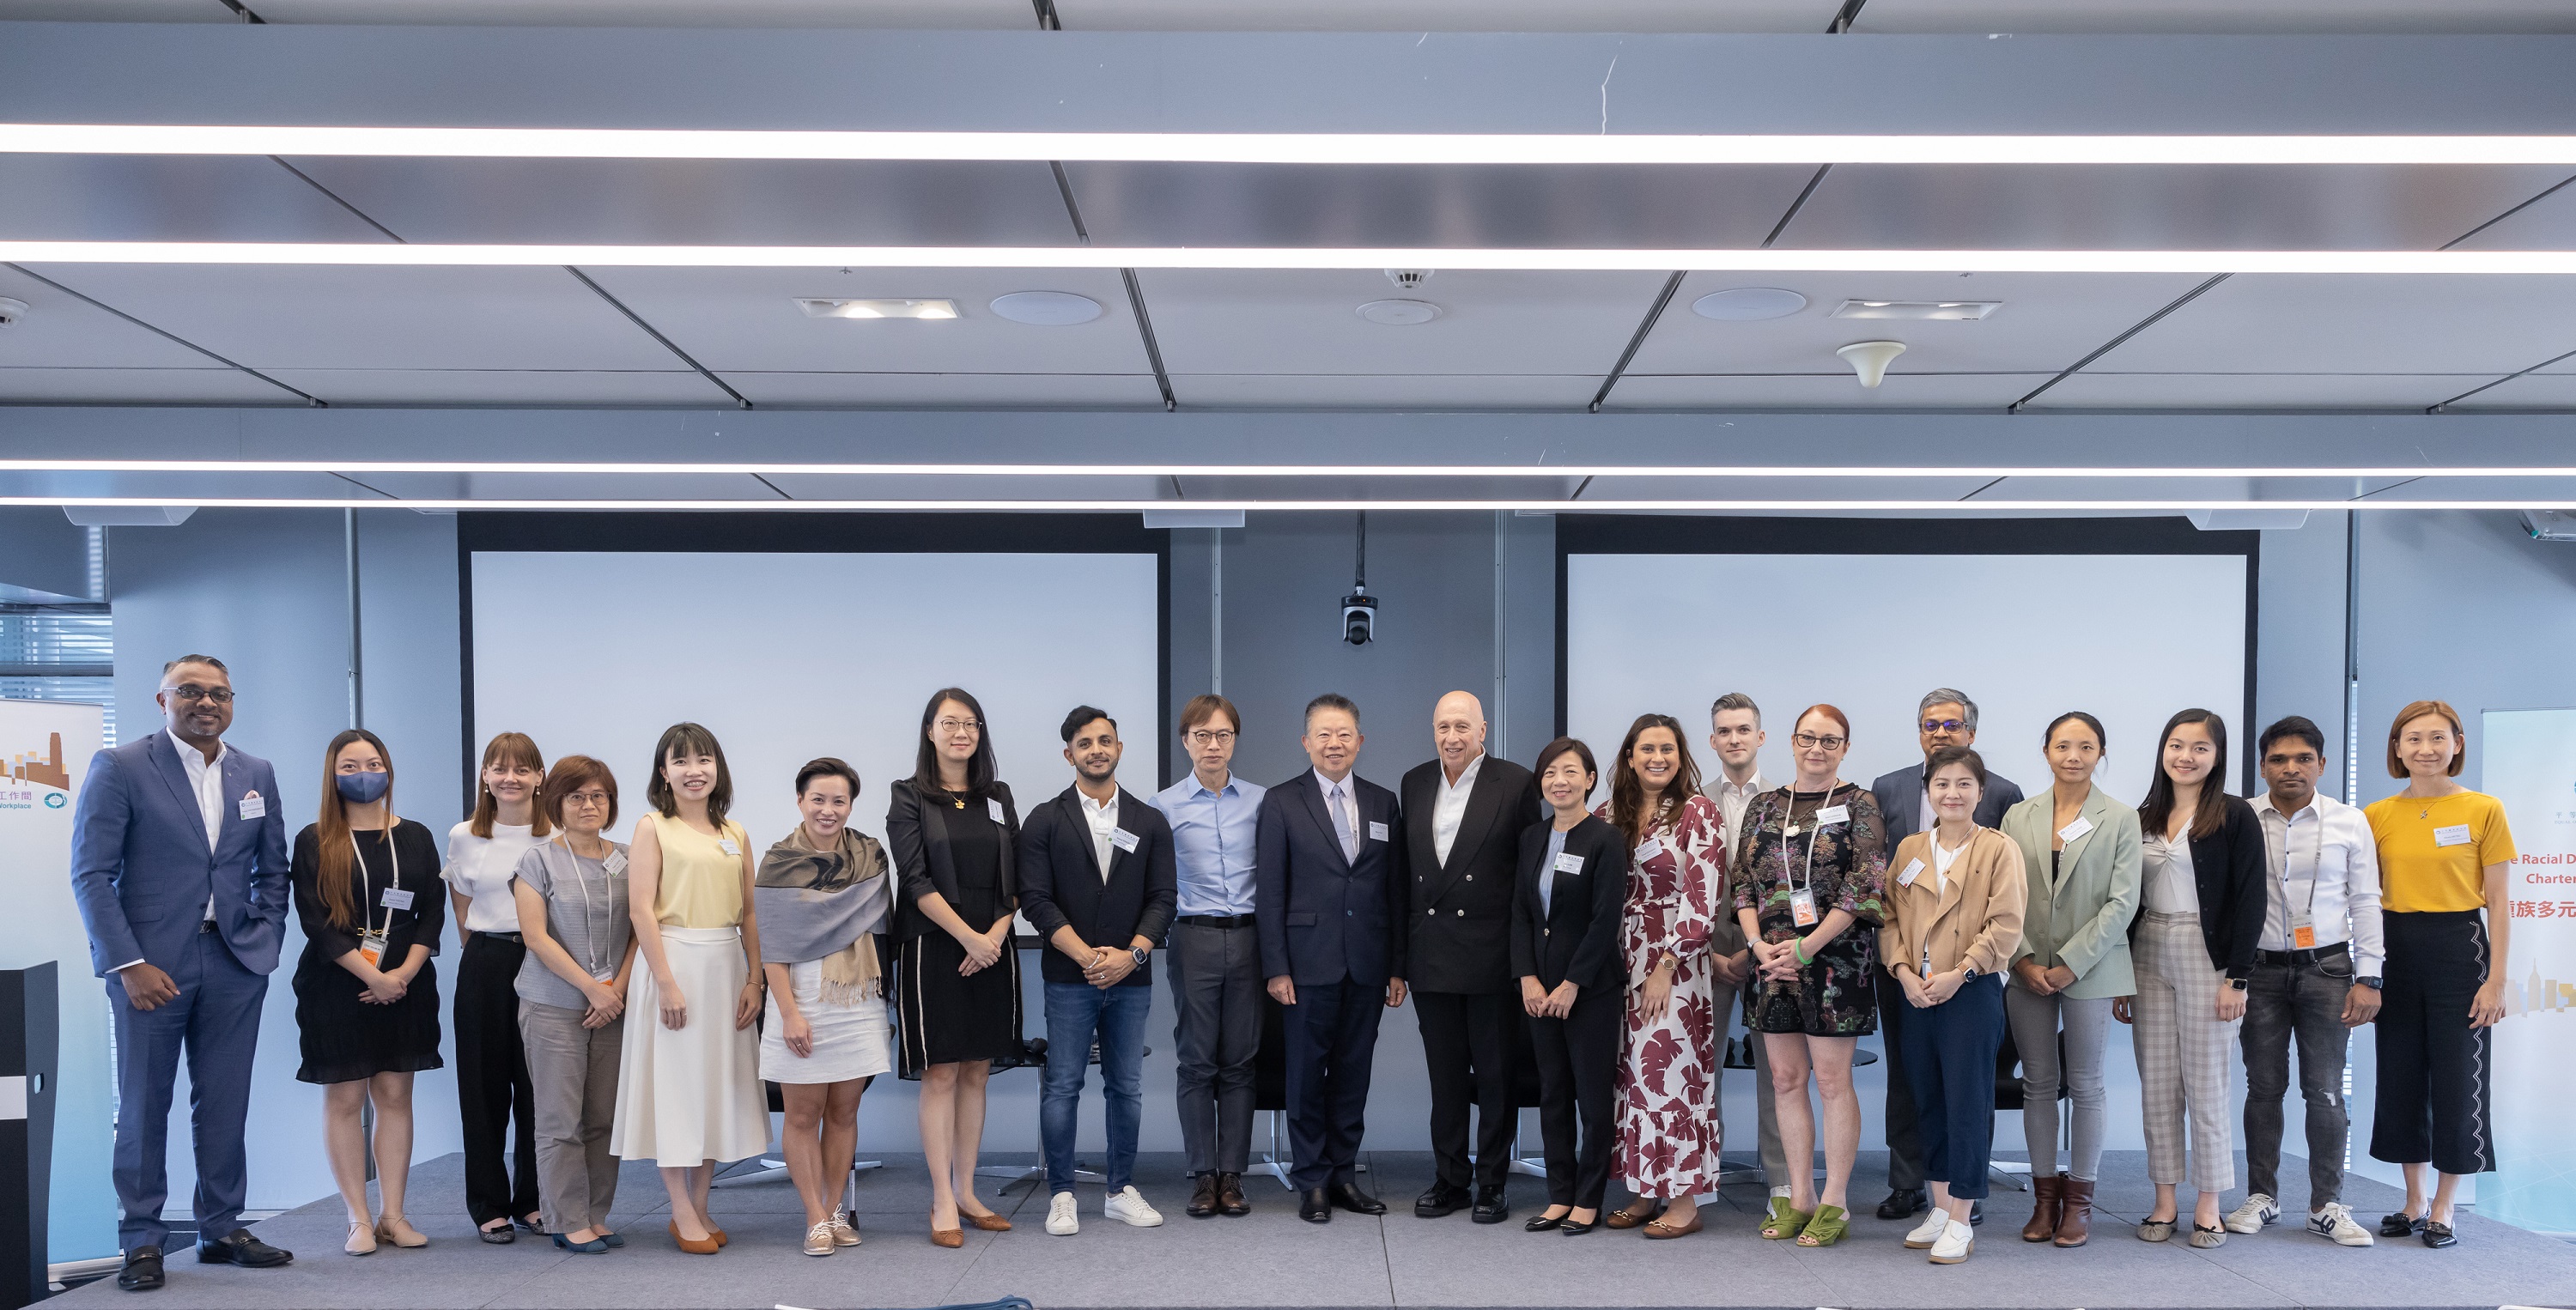 EOC Chairperson Mr Ricky CHU Man-kin (tenth from left) and Dr Allan Zeman, Chairman of Lan Kwai Fong Group and keynote speaker (eleventh from left) in a group photo with representatives from Charter signatory organisations.